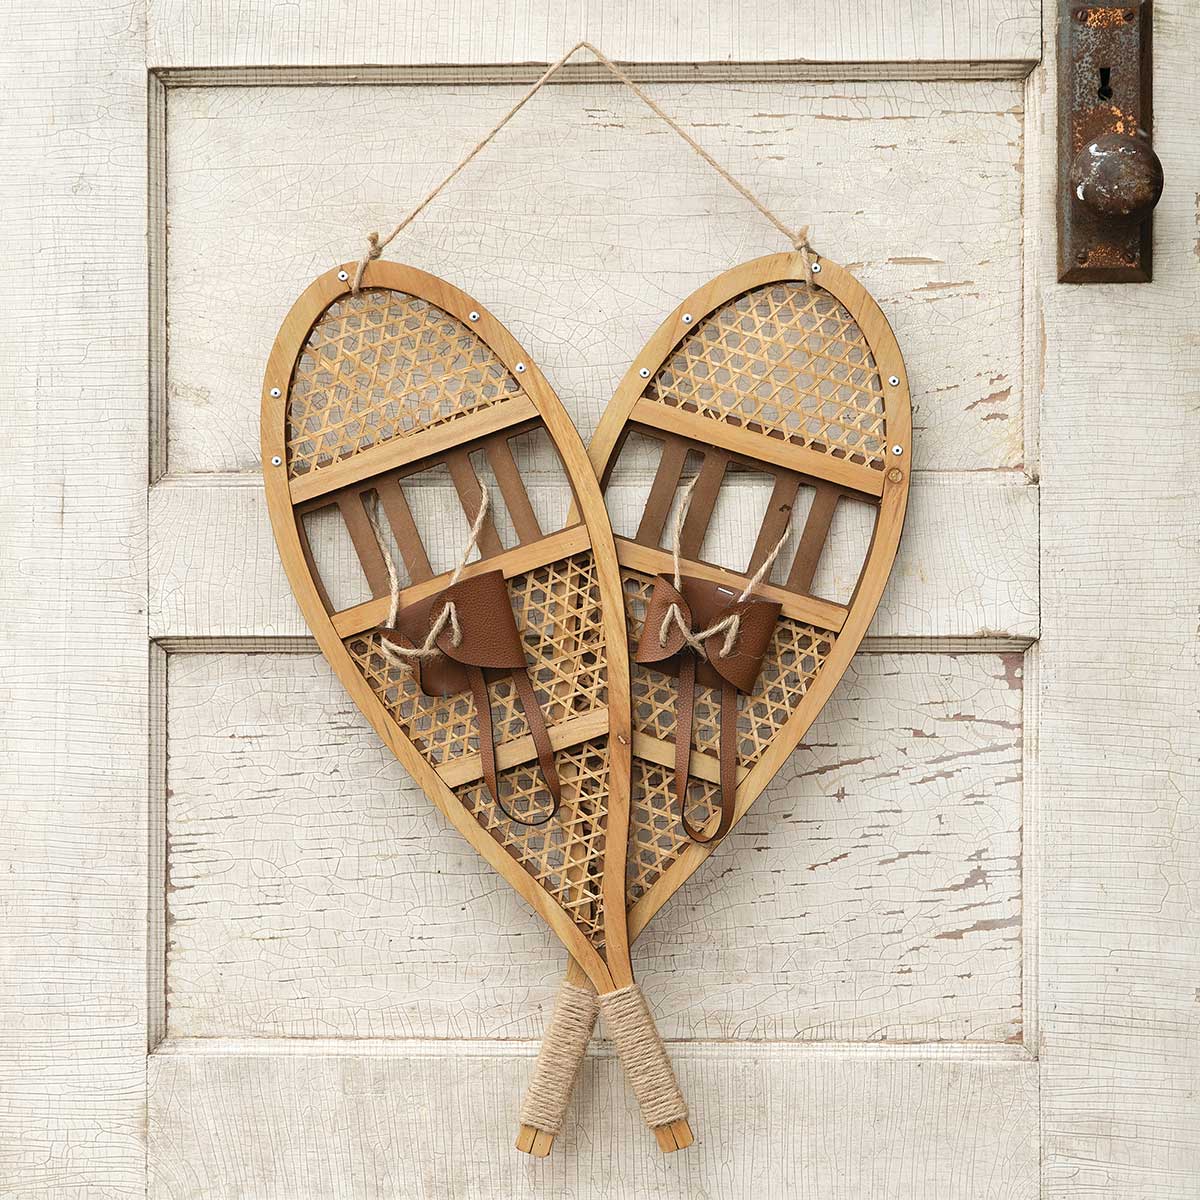 WOOD/WICKER SNOWSHOES NATURAL WITH JUTE HANGER - Click Image to Close